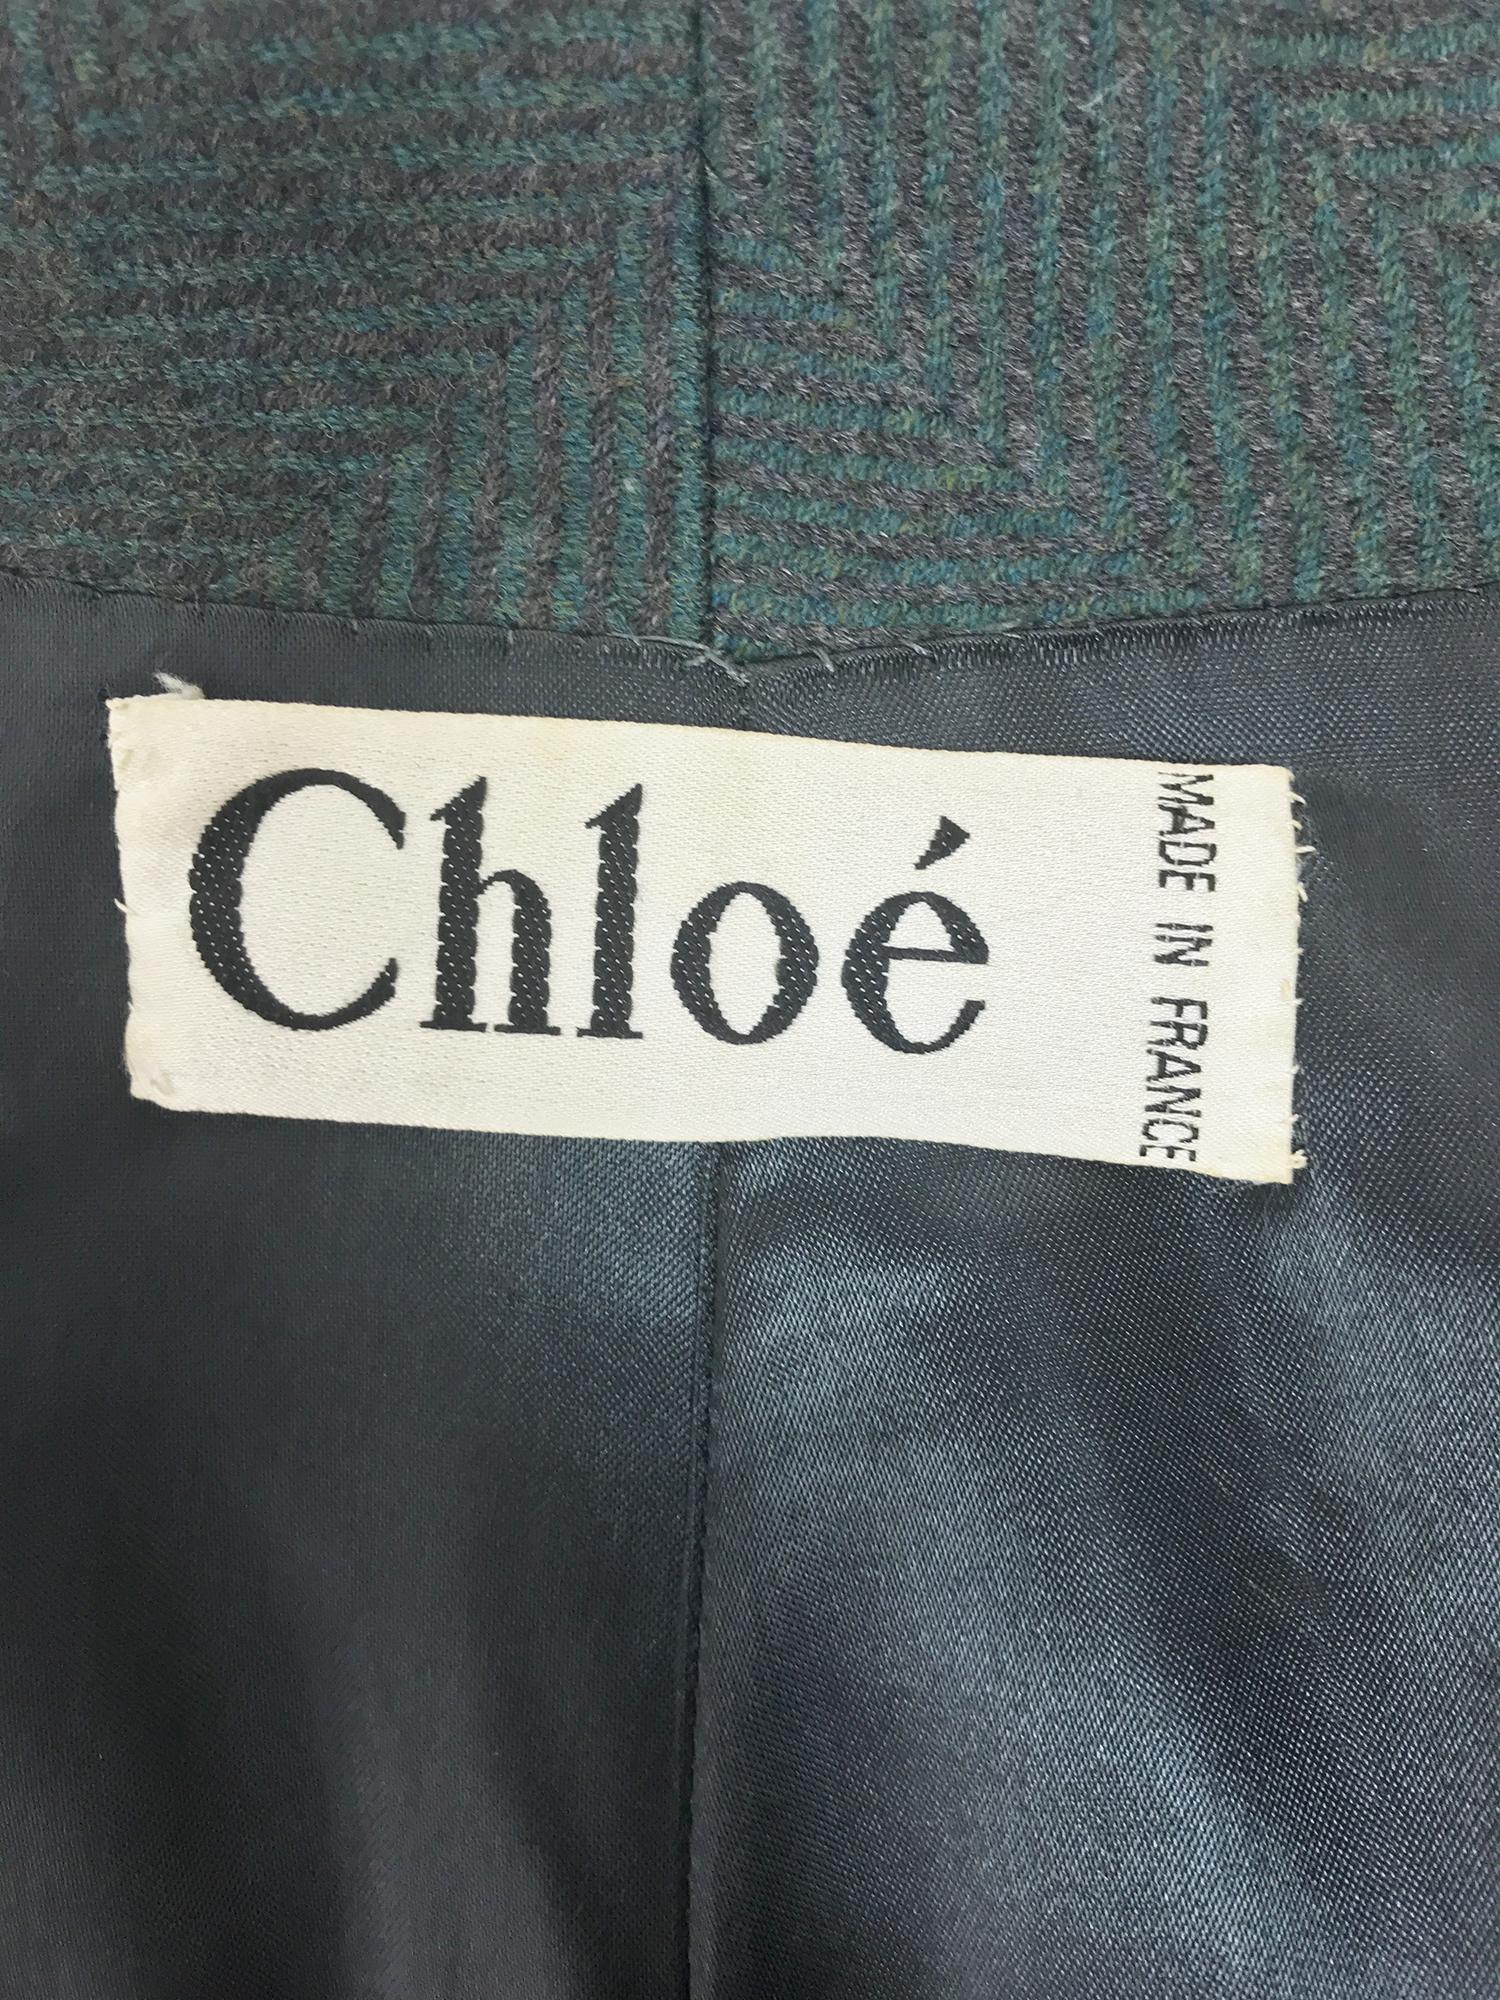 Chloe embroidered teal wool swing jacket and skirt from the 1980s 9